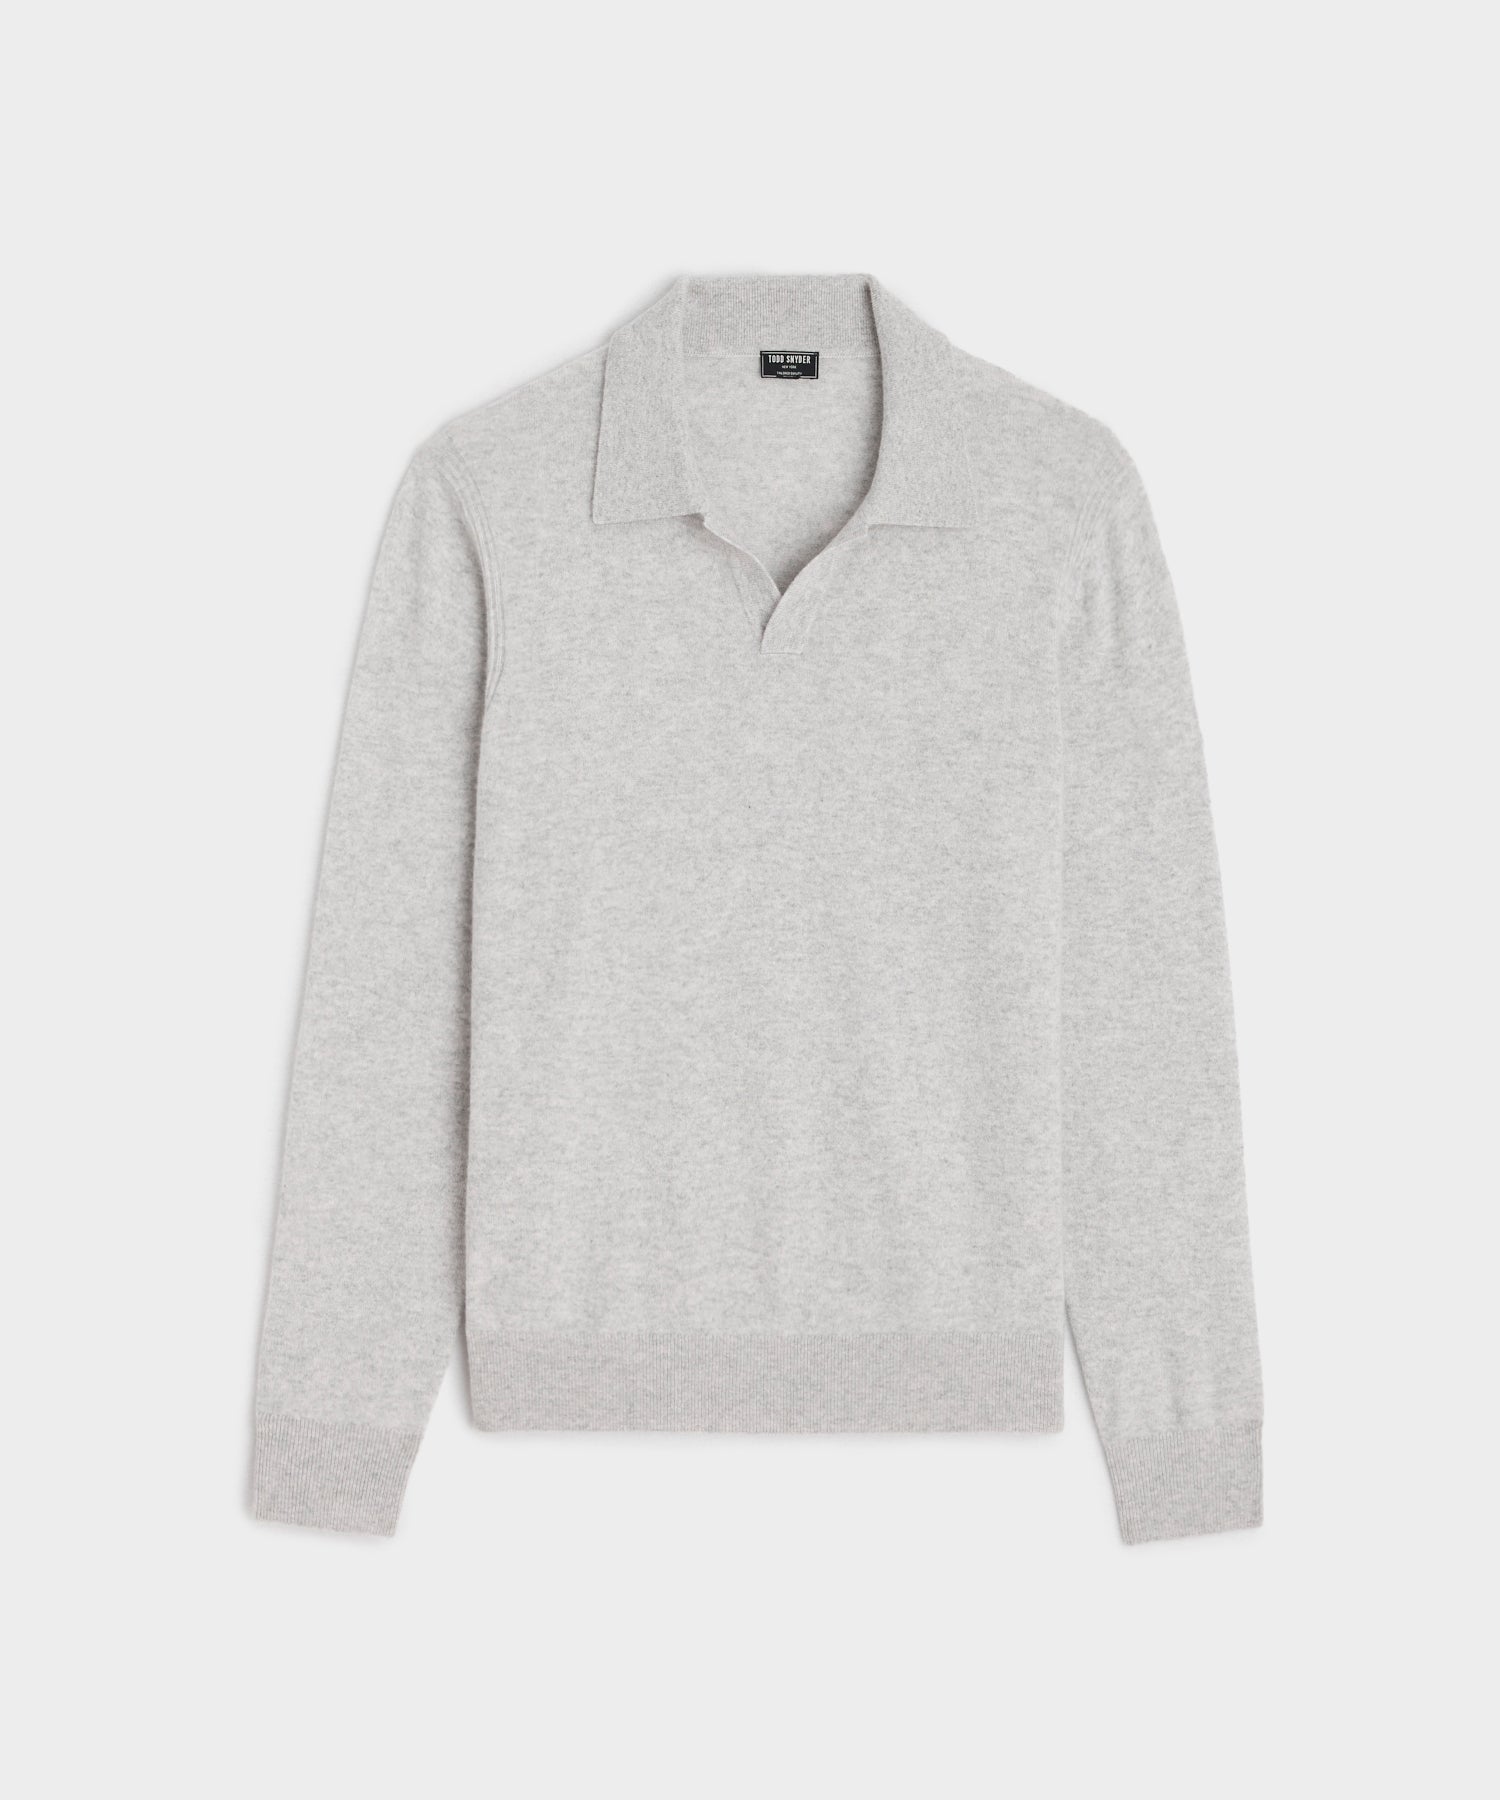 Long-Sleeve Cashmere Montauk Polo in Heather Grey